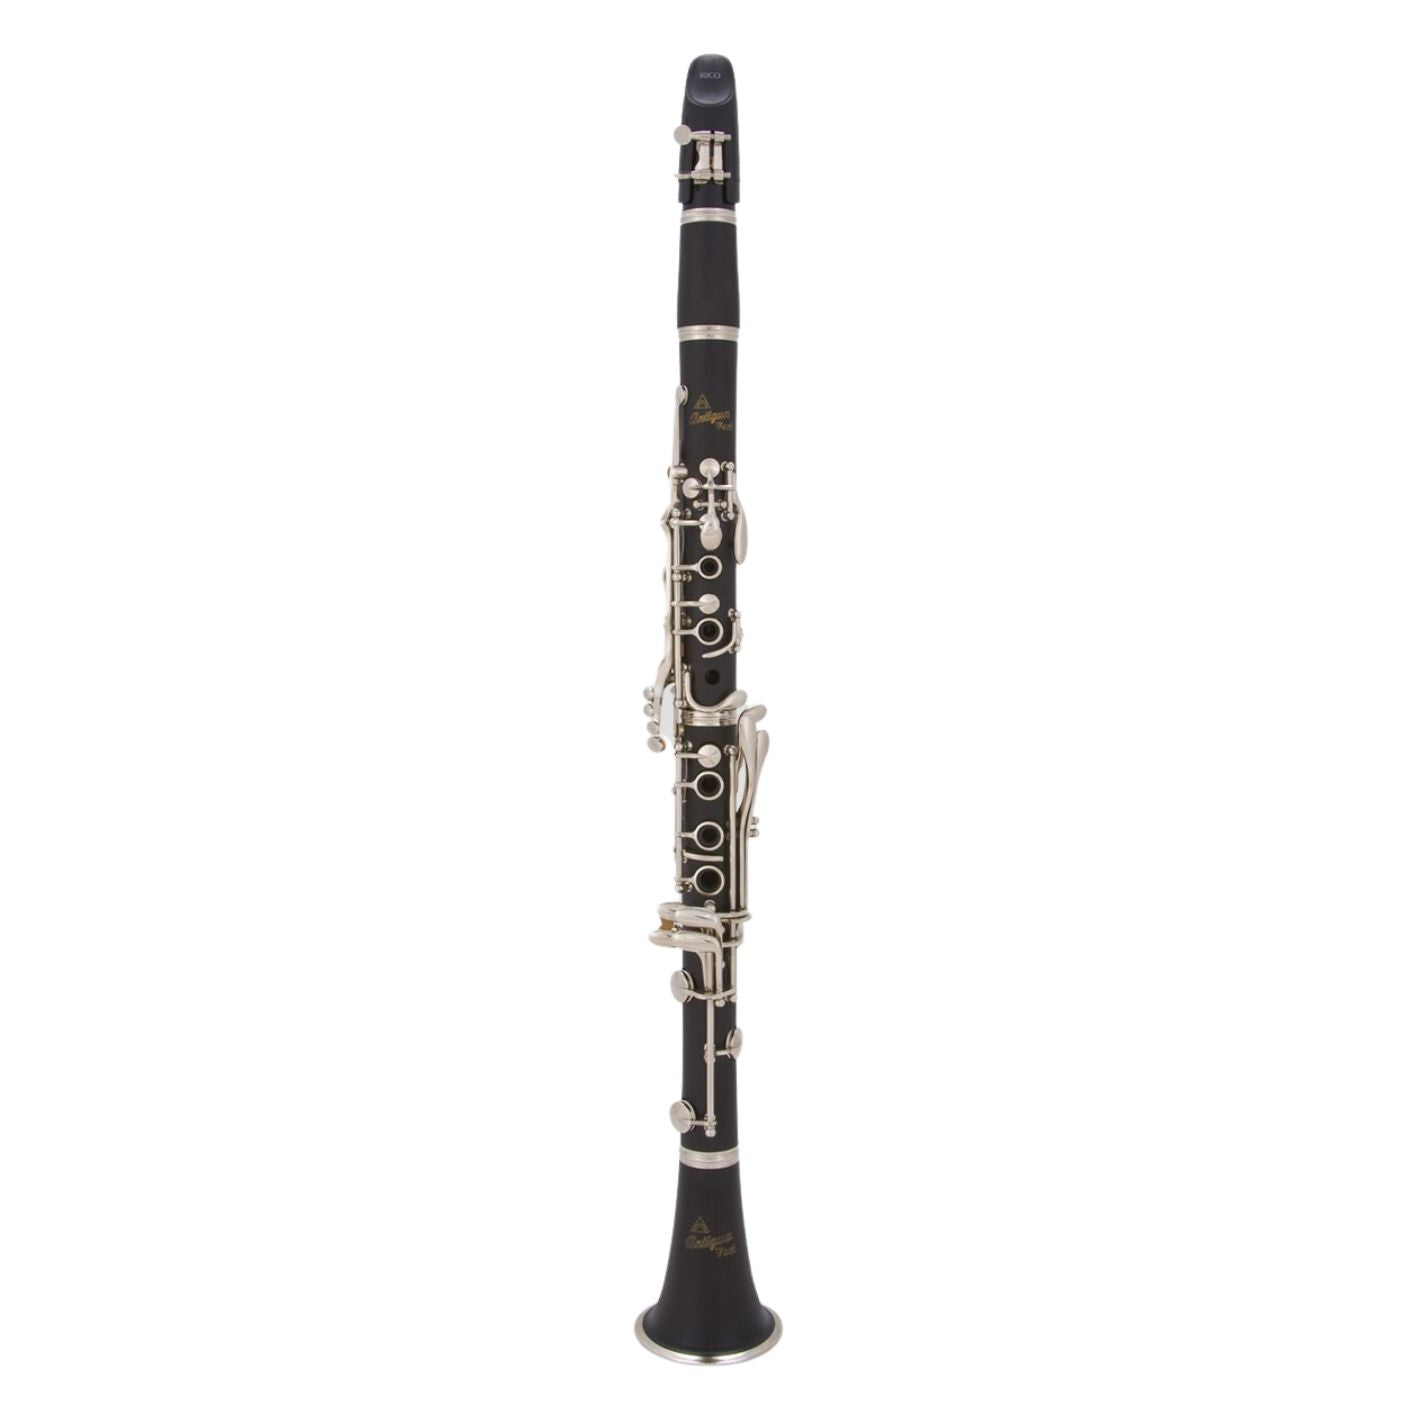 Antigua CL2220 Vosi Bb Beginner Clarinet Black Matte ABS Finished (CL-2220)